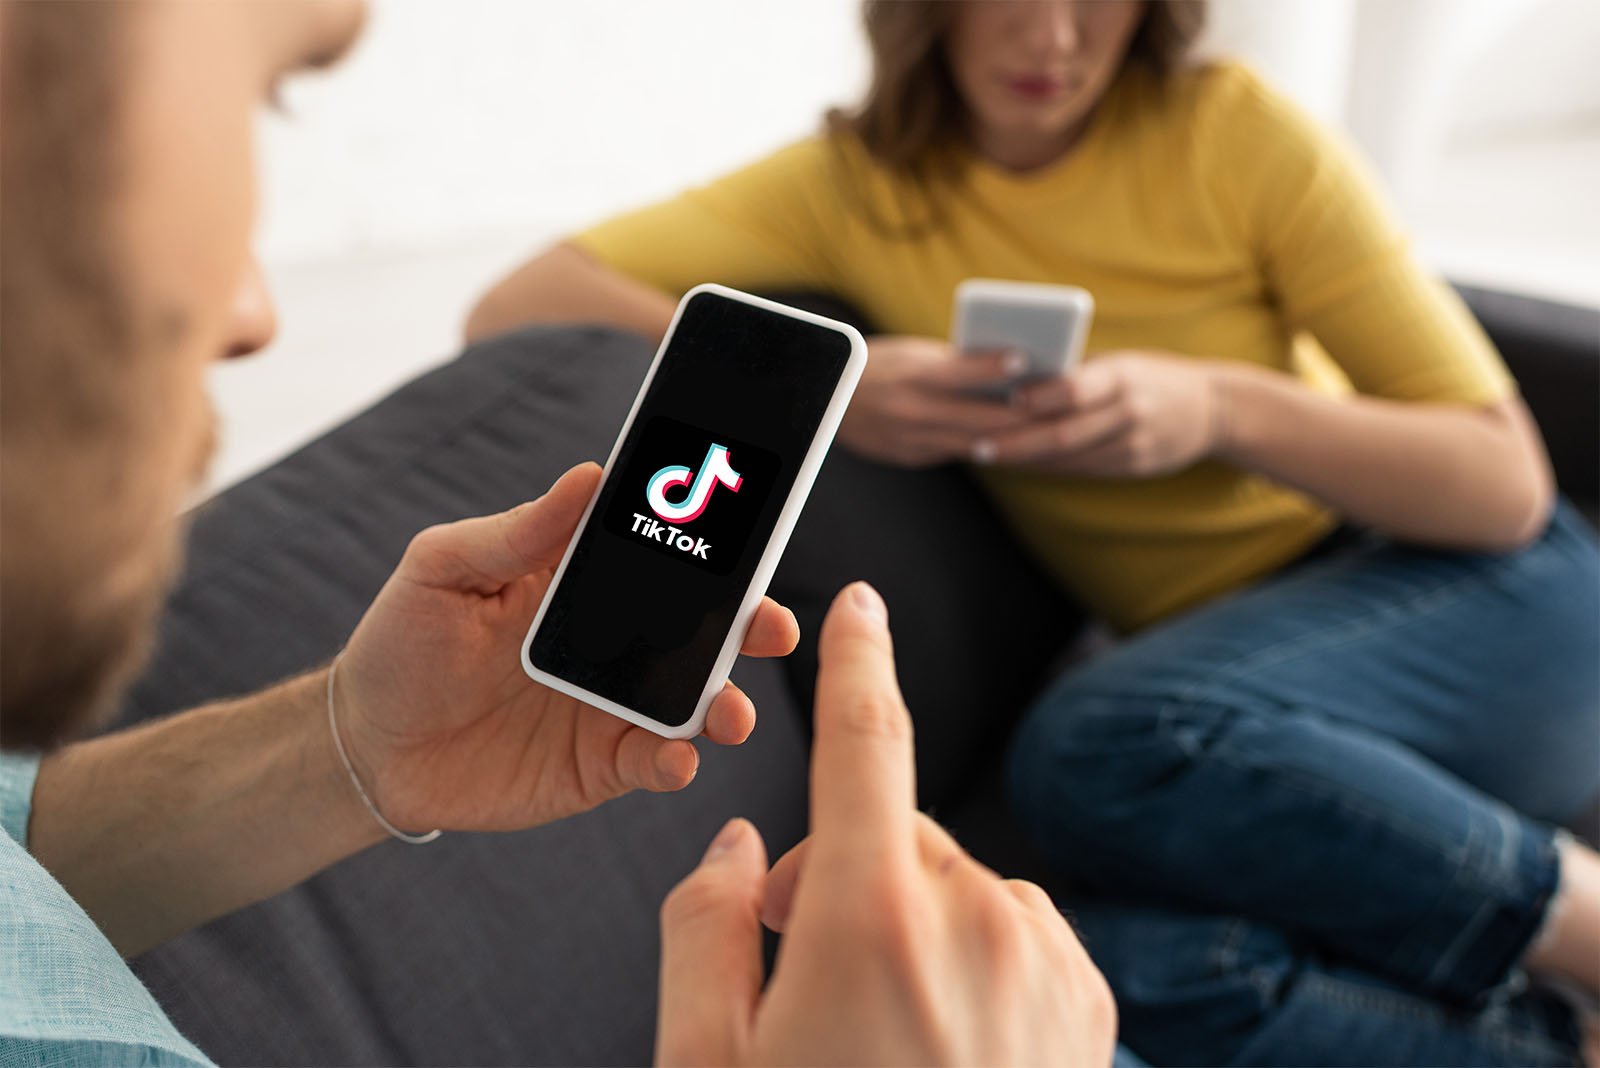 A man and a woman sitting on a sofa, each using their smartphones. the man's phone, held in his hand, displays the tiktok logo on its screen. focus on the man's phone screen.